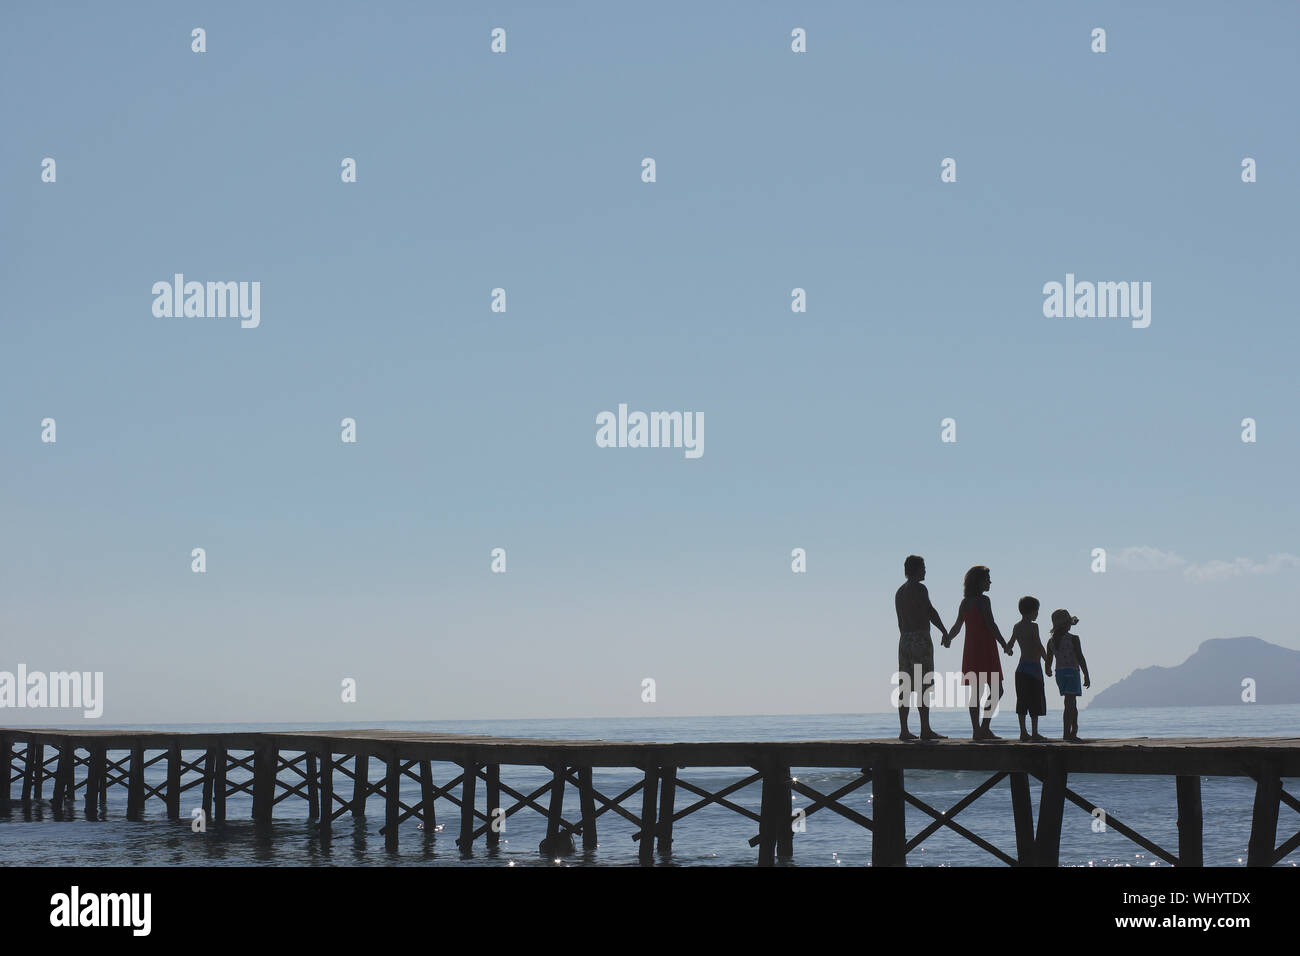 Full length of silhouetted parents and two children holding hands on jetty Stock Photo